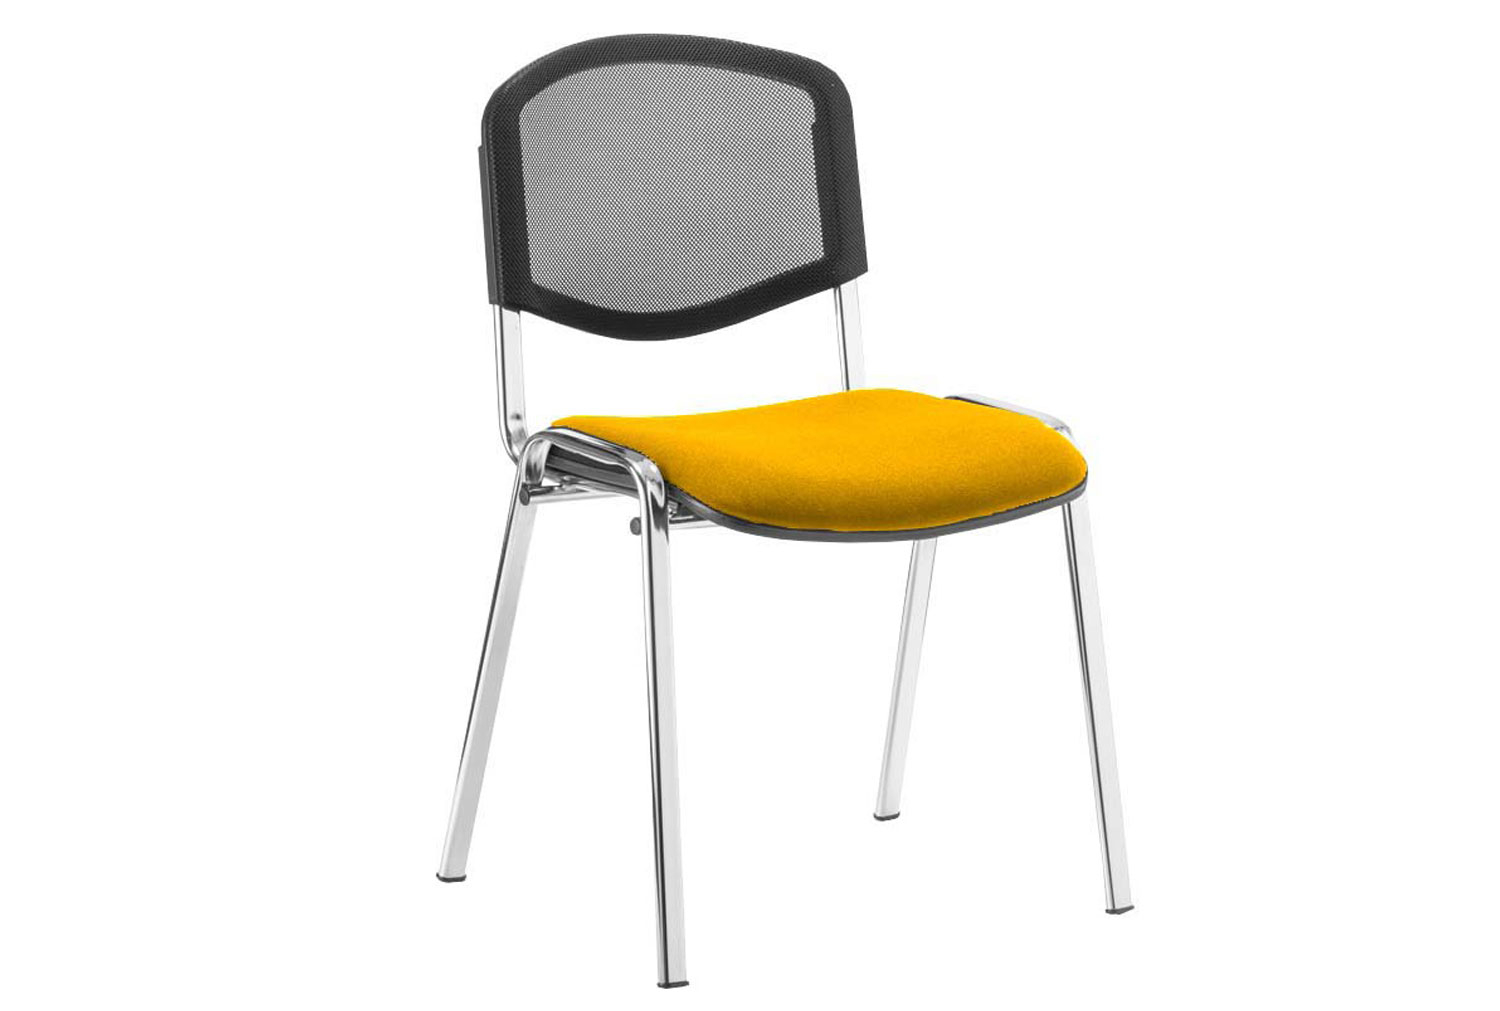 Qty 4 - ISO Chrome Frame Mesh Back Conference Office Chair (Senna Yellow)